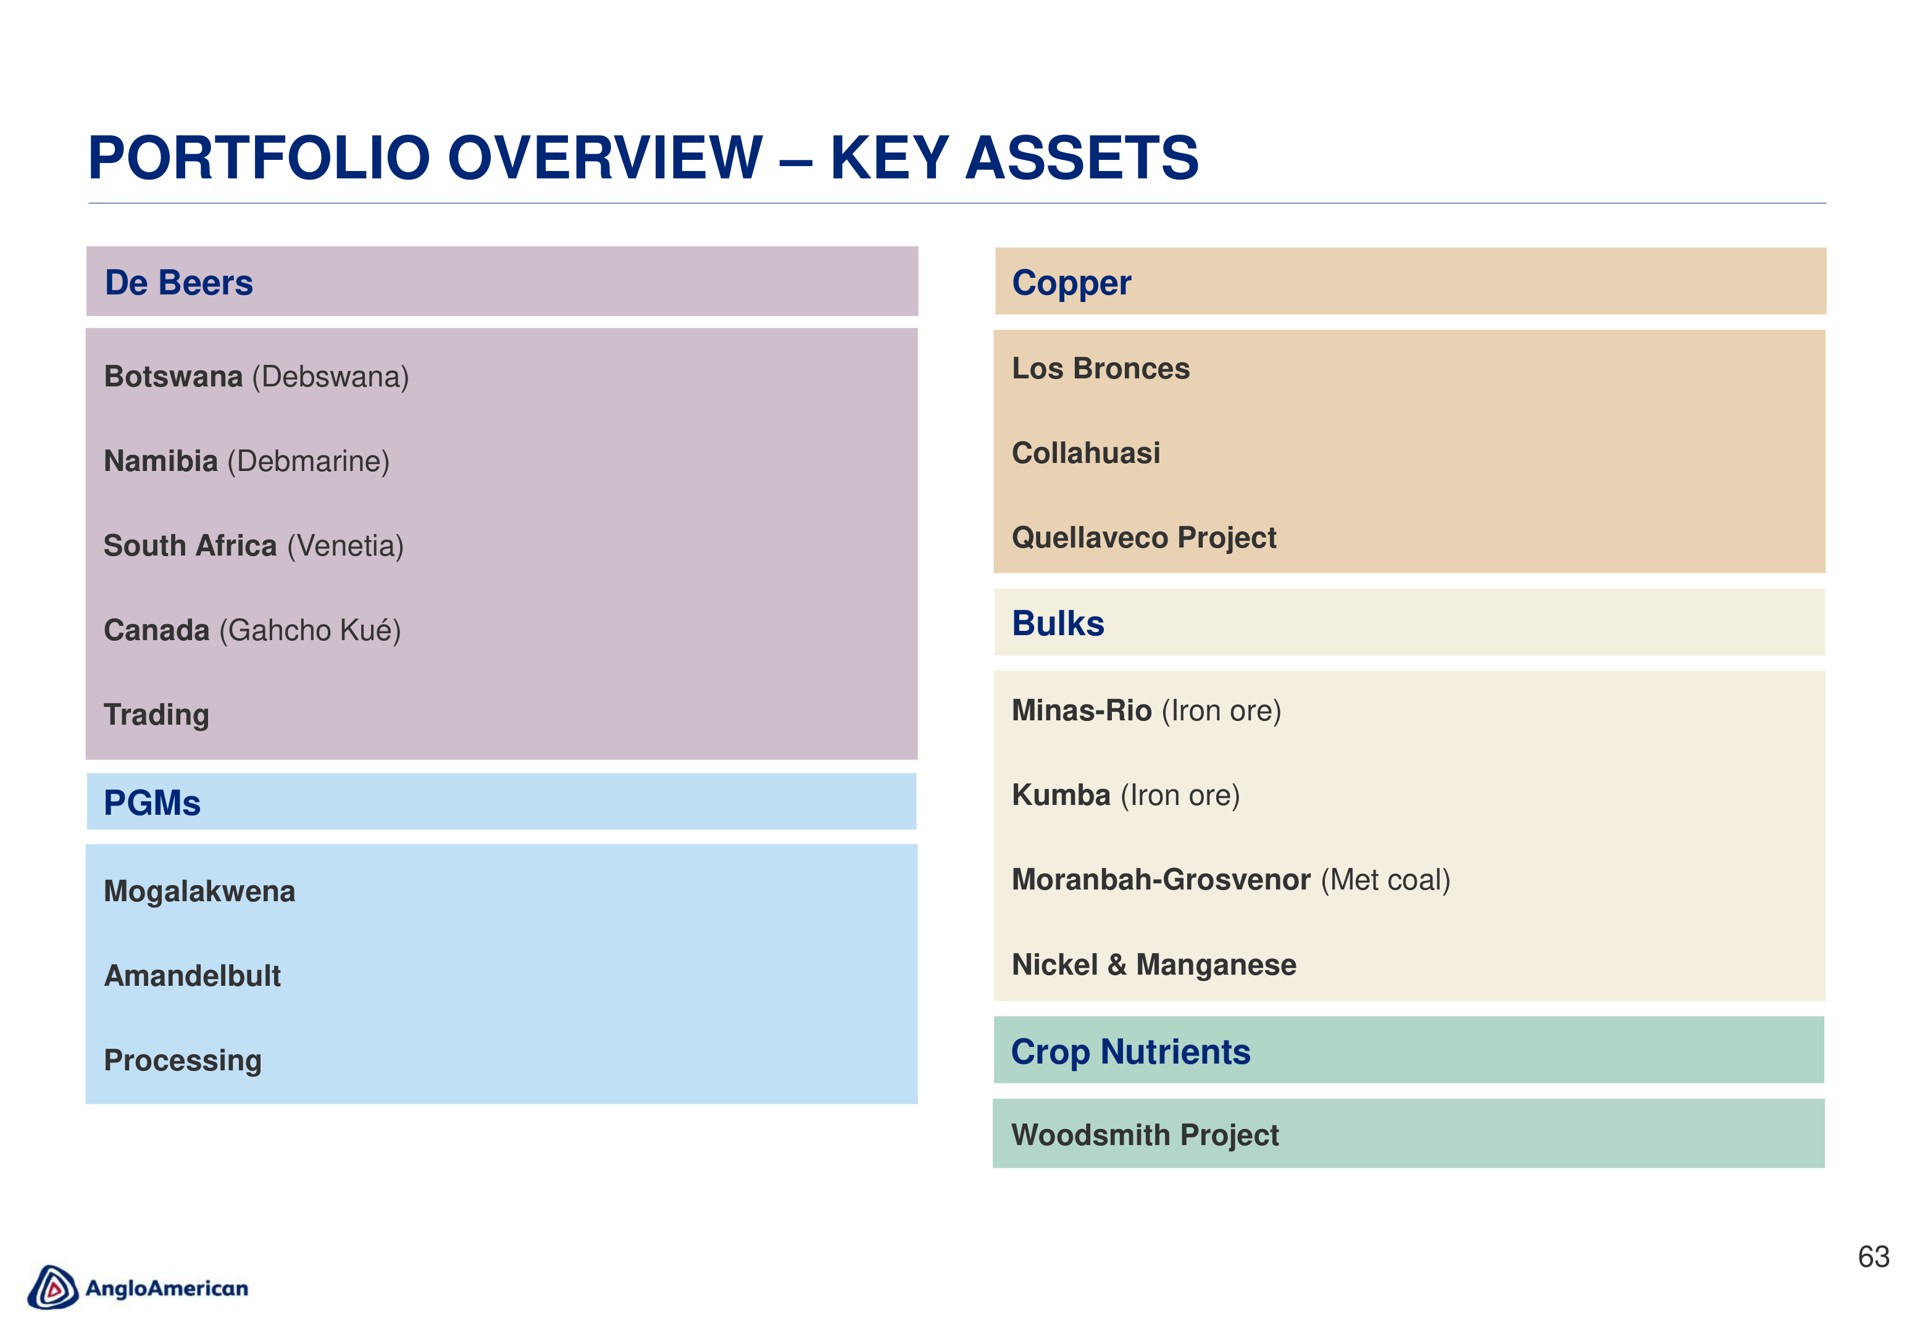 portfolio overview key assets | AngloAmerican